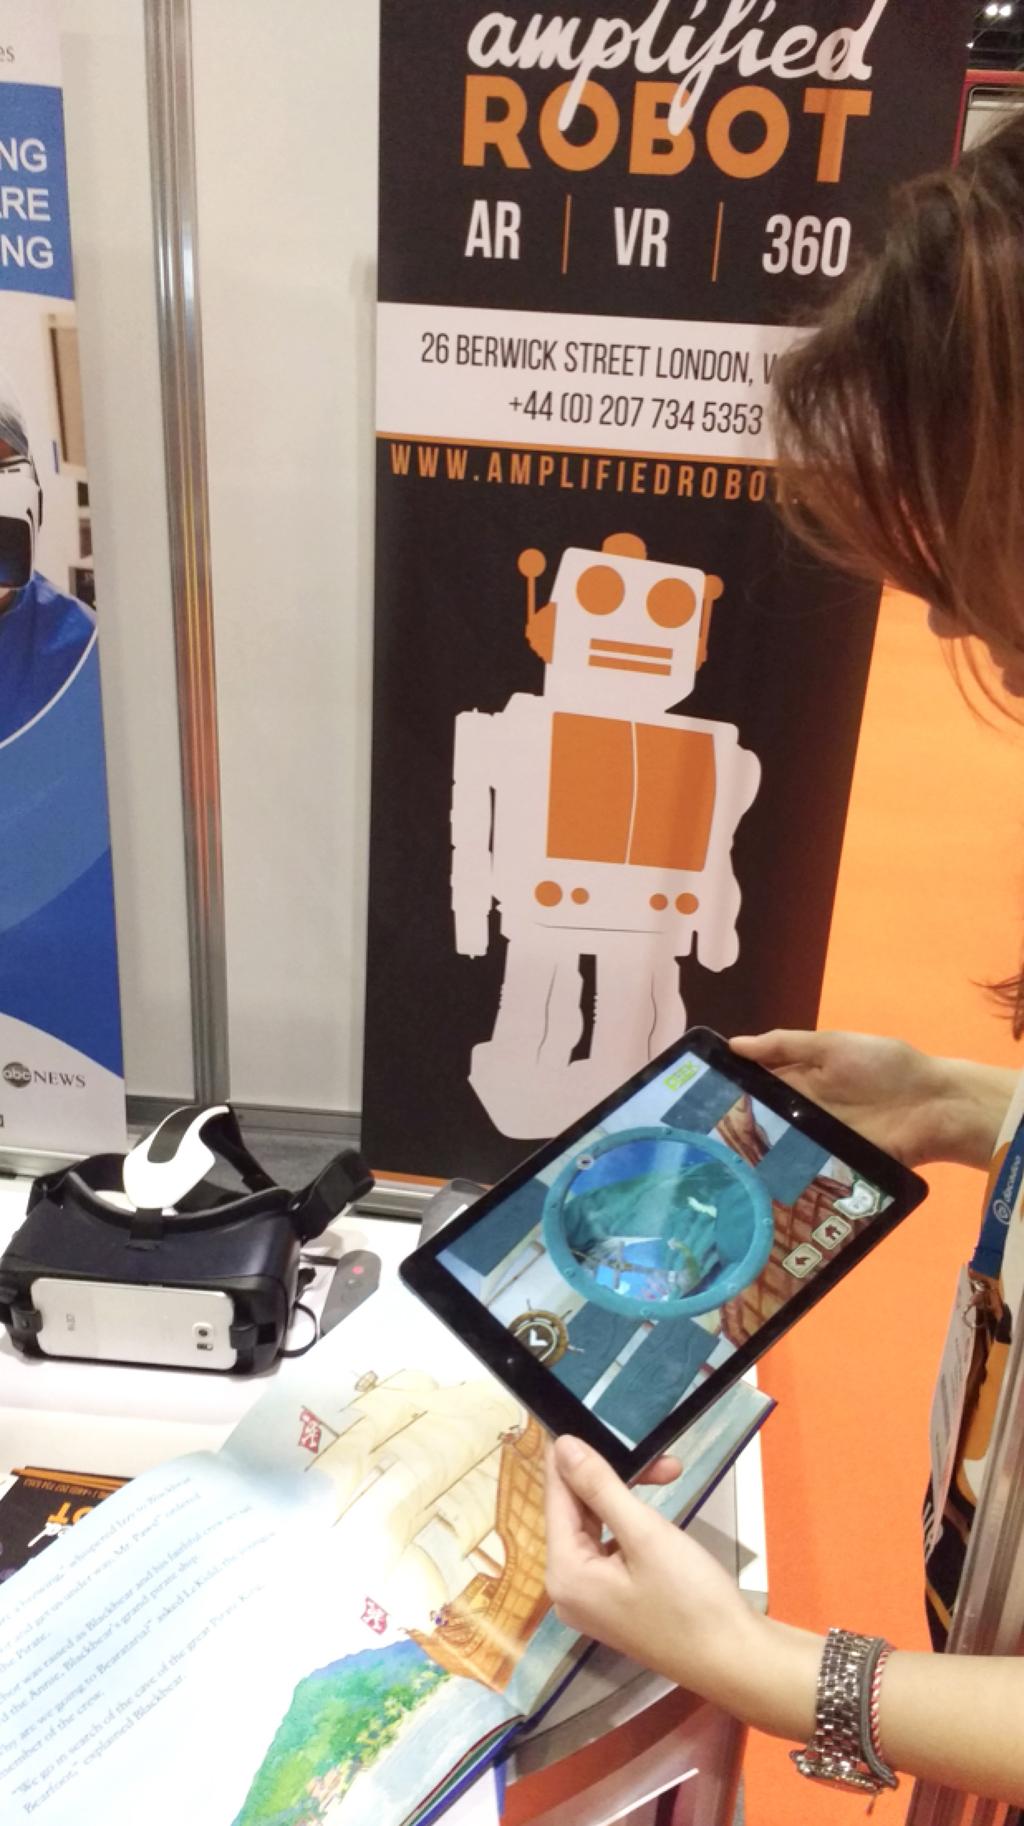 To find out more about AR and VR, we spoke with executives from Amplified Robot at the company s booth on the show floor, where the company was showcasing a VR set used for medical training.